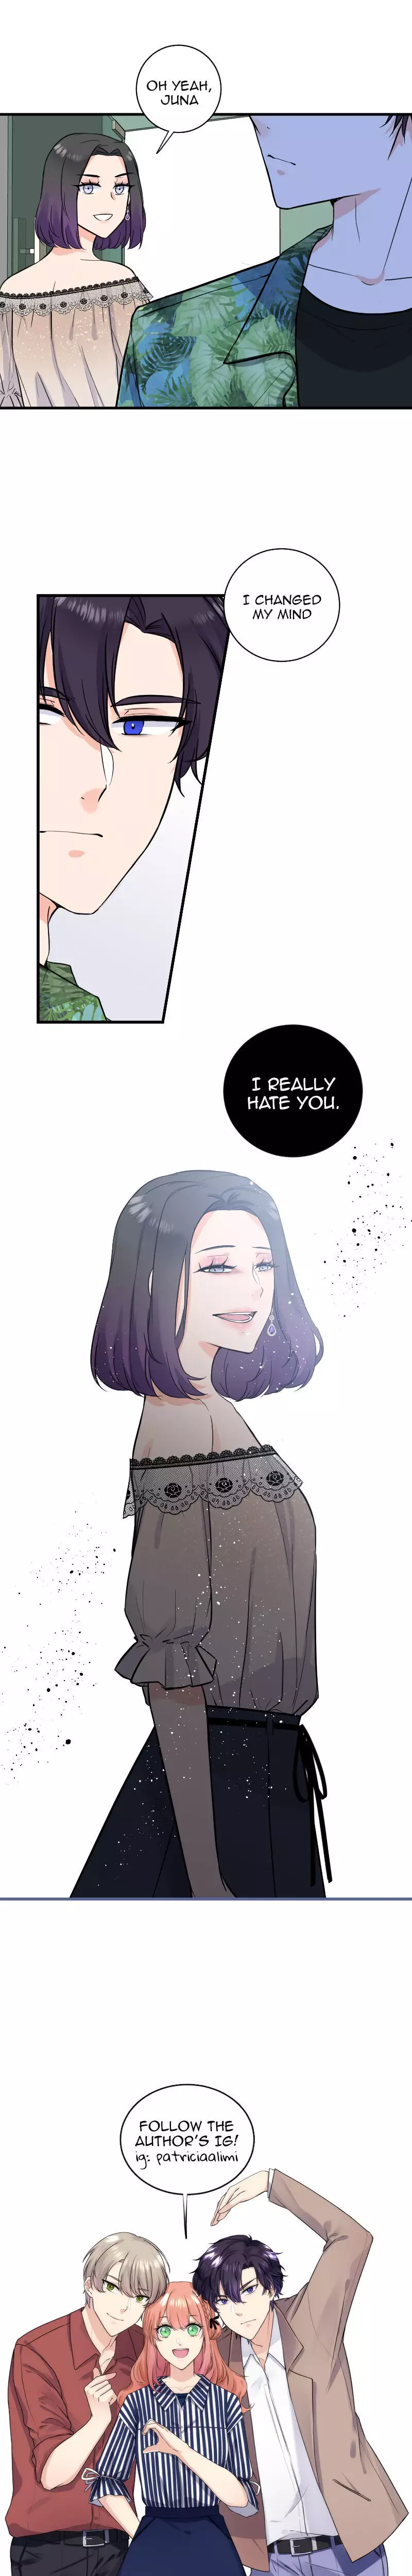 Hate You 999 Times - 19 page 40